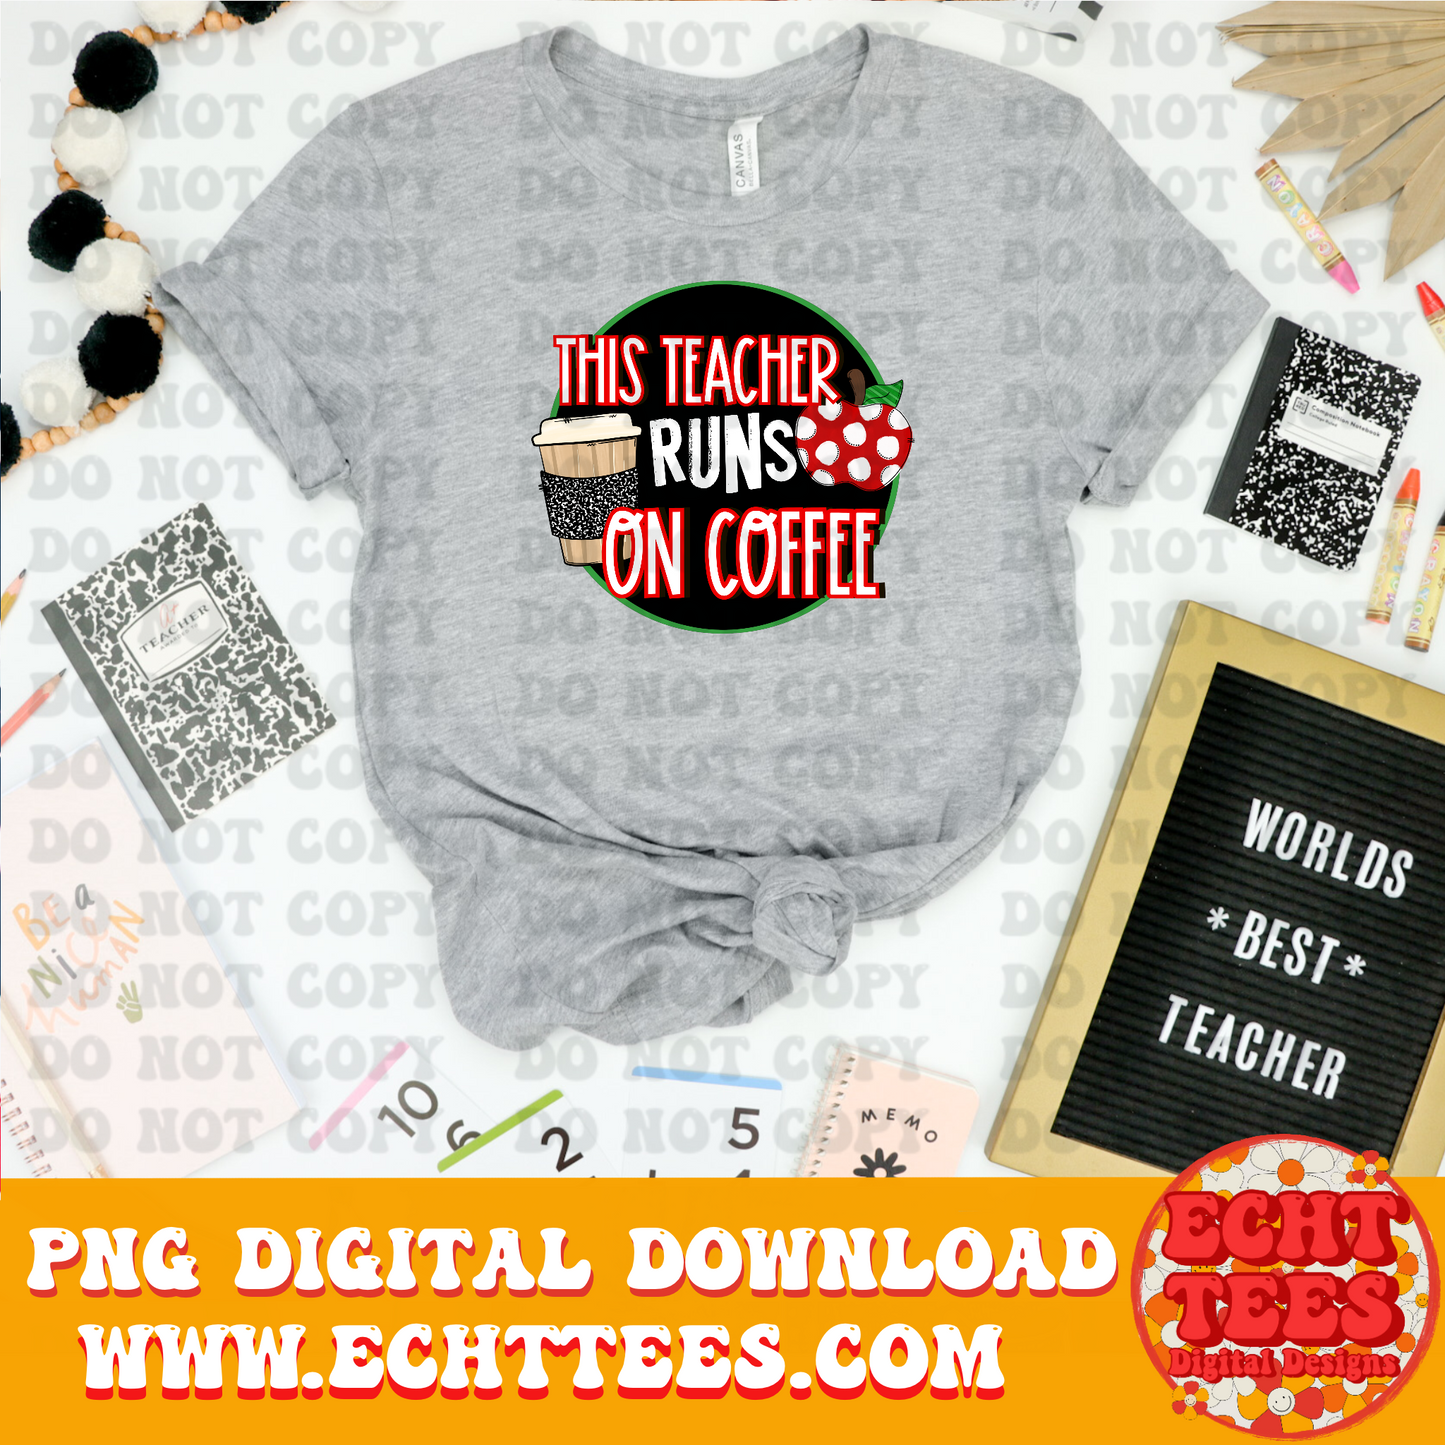 This teacher runs on coffee PNG Digital Download